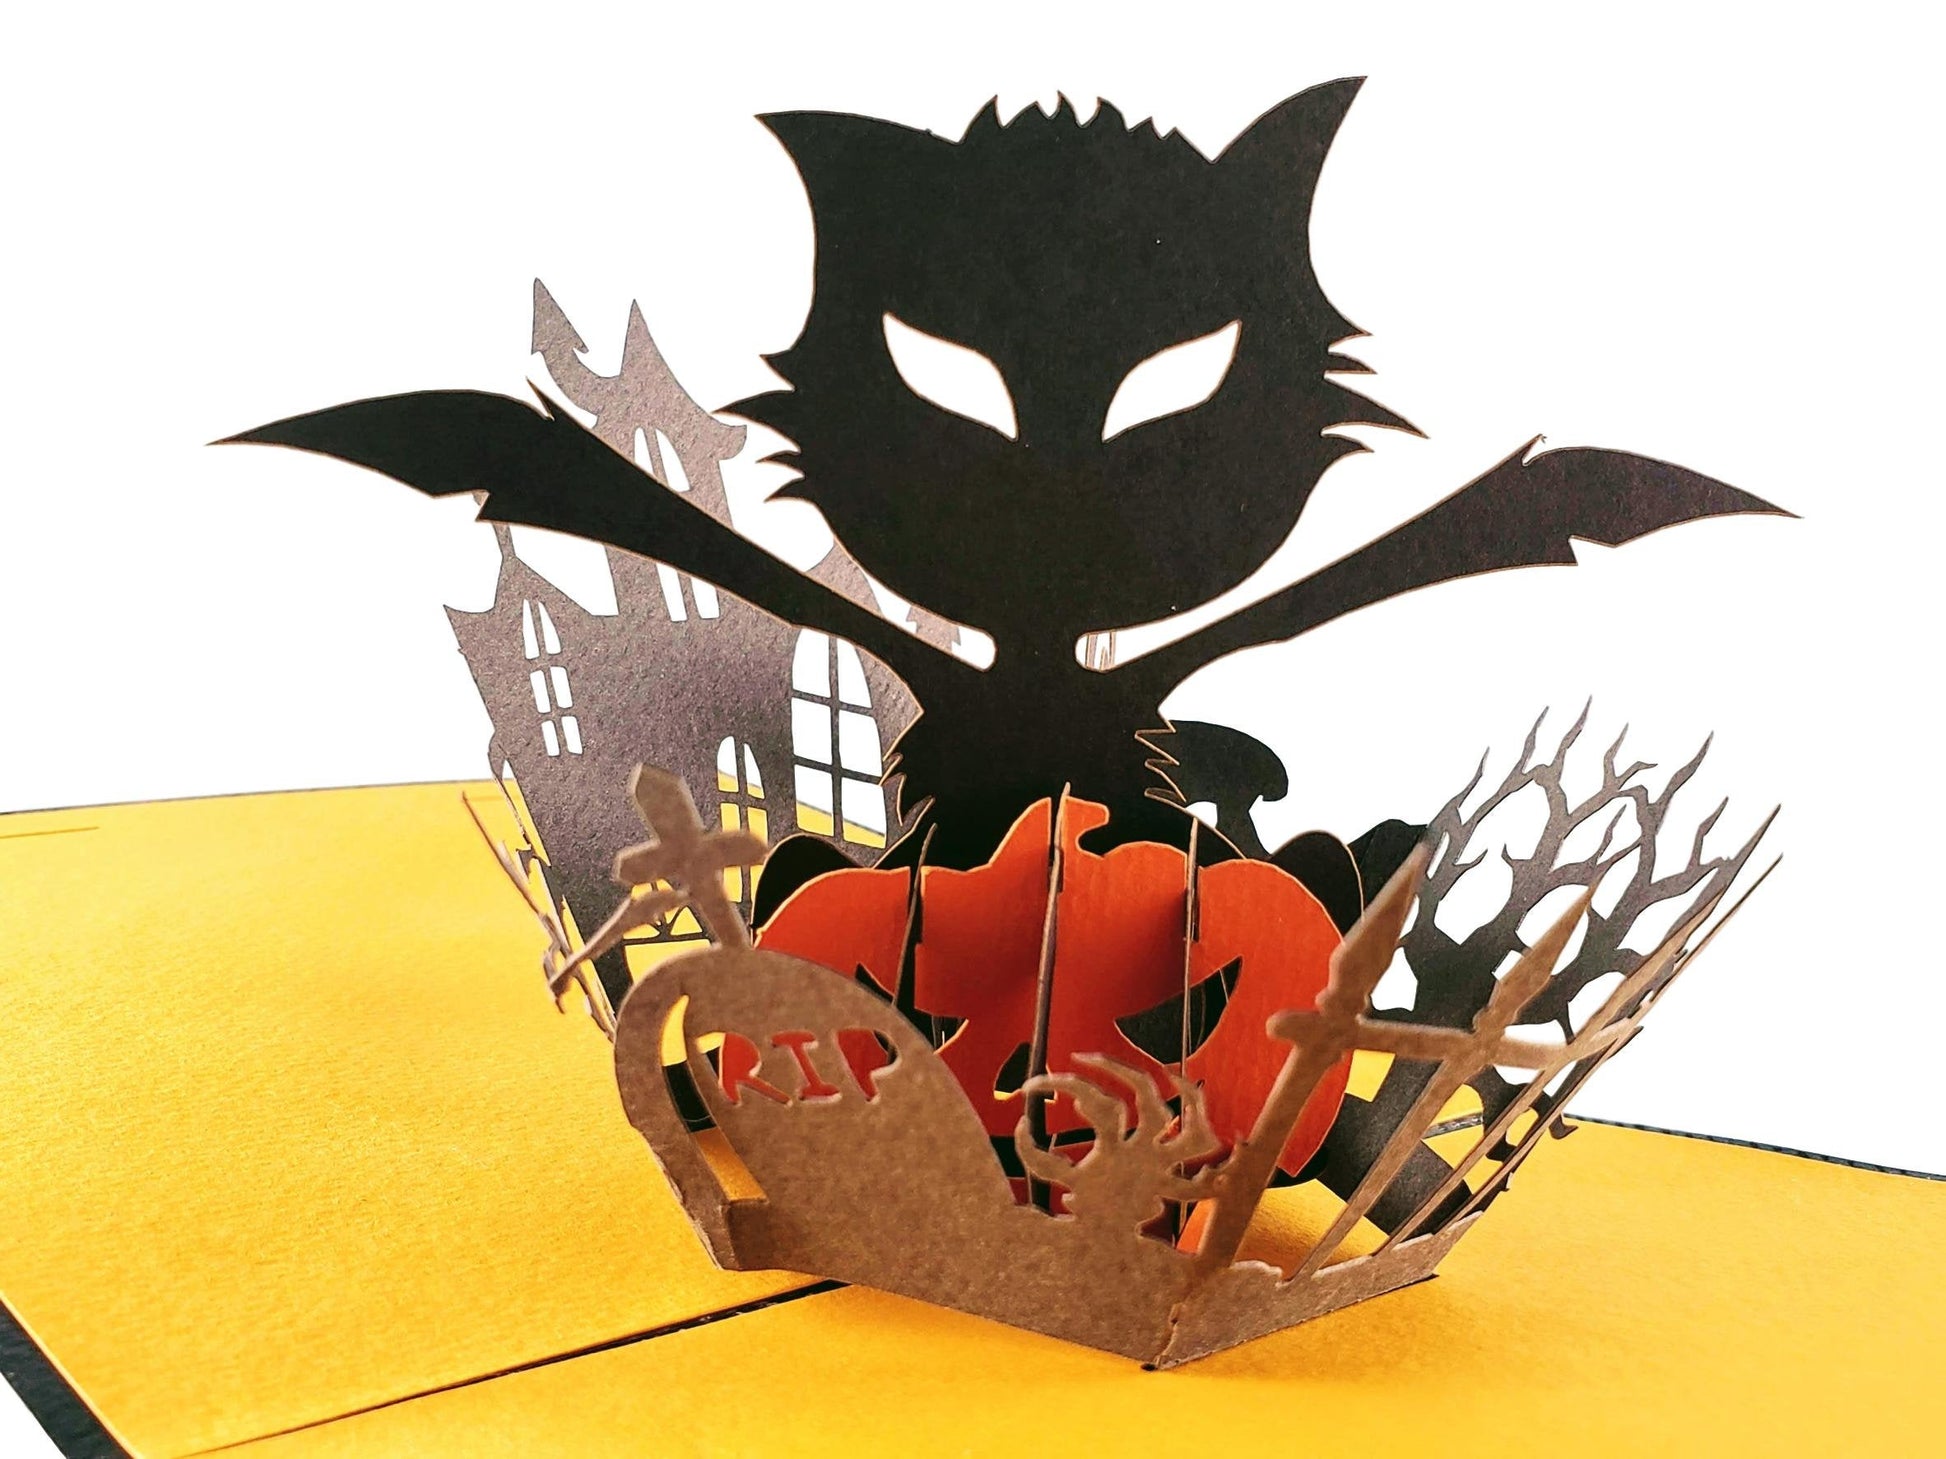 Black Magic Cat 3D Pop Up Greeting Card - 3d halloween card - black cat halloween cards - cat hallow - iGifts And Cards